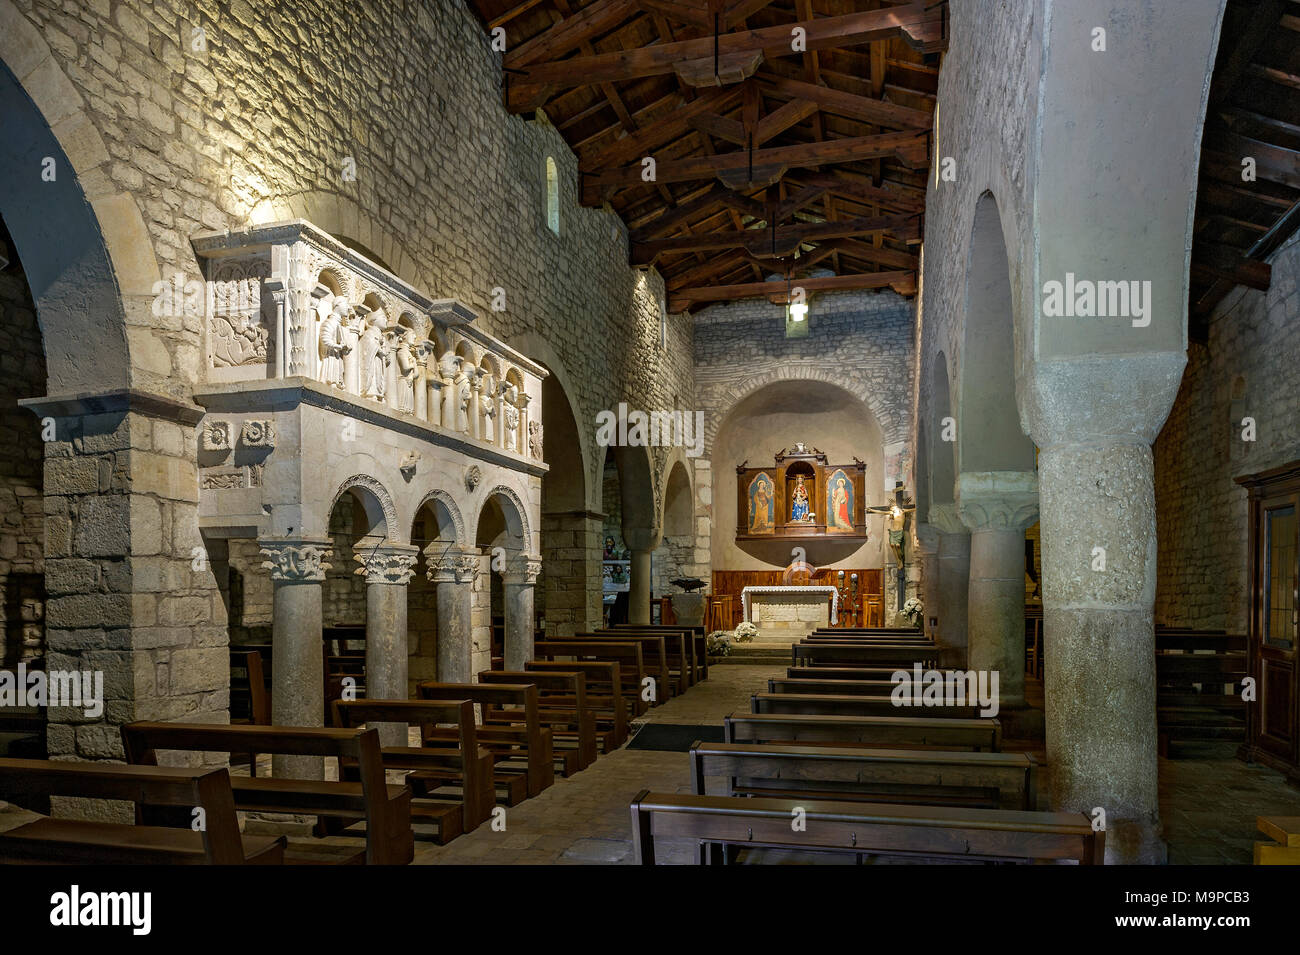 Pulpit and altar in the central nave of the pilgrimage church, Chiesa Santa Maria del Canneto, pilgrimage site Stock Photo